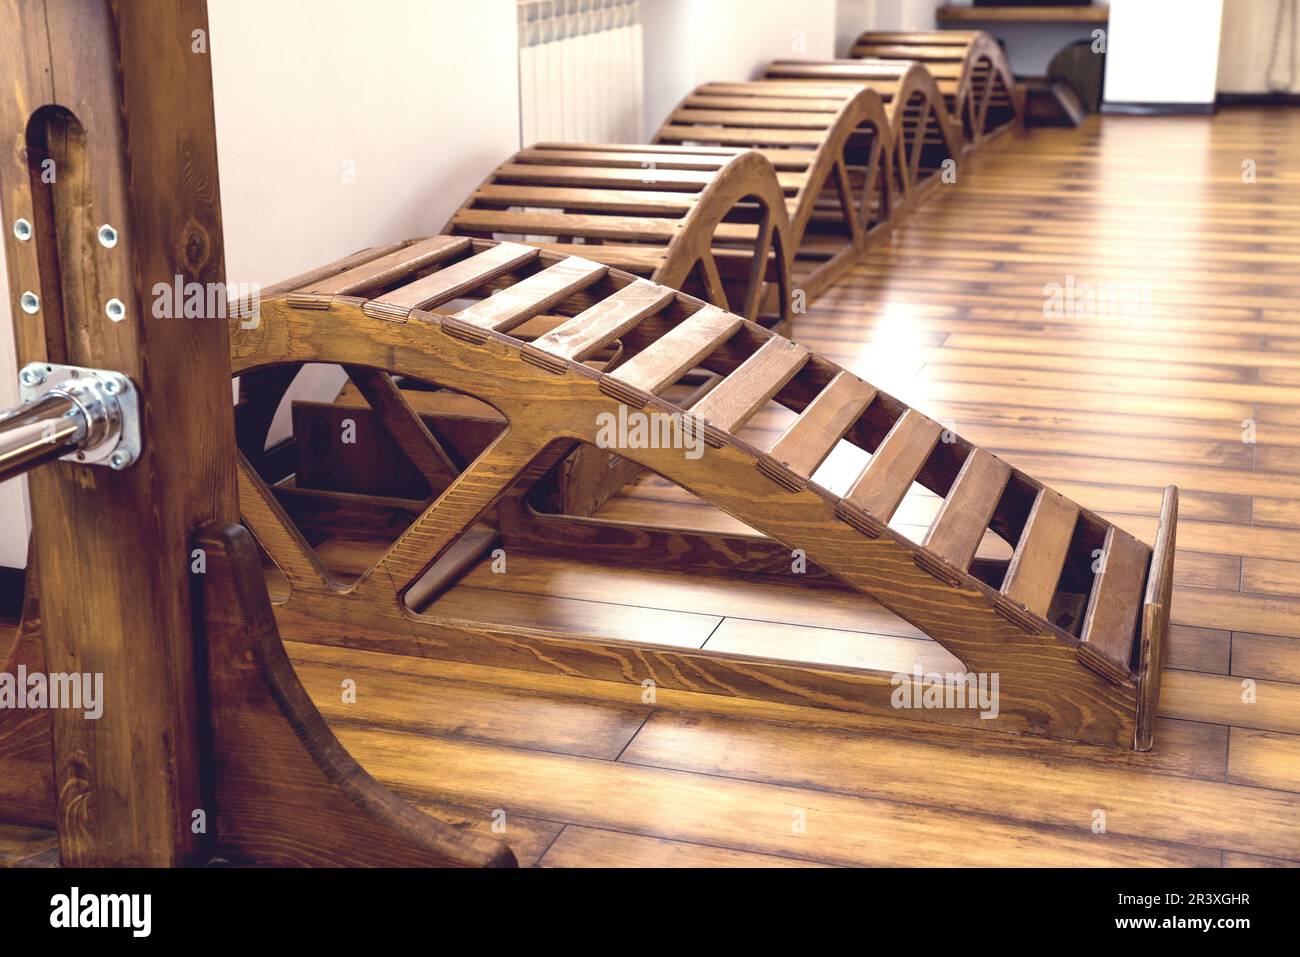 Interior of Gym with yoga wooden benches Stock Photo